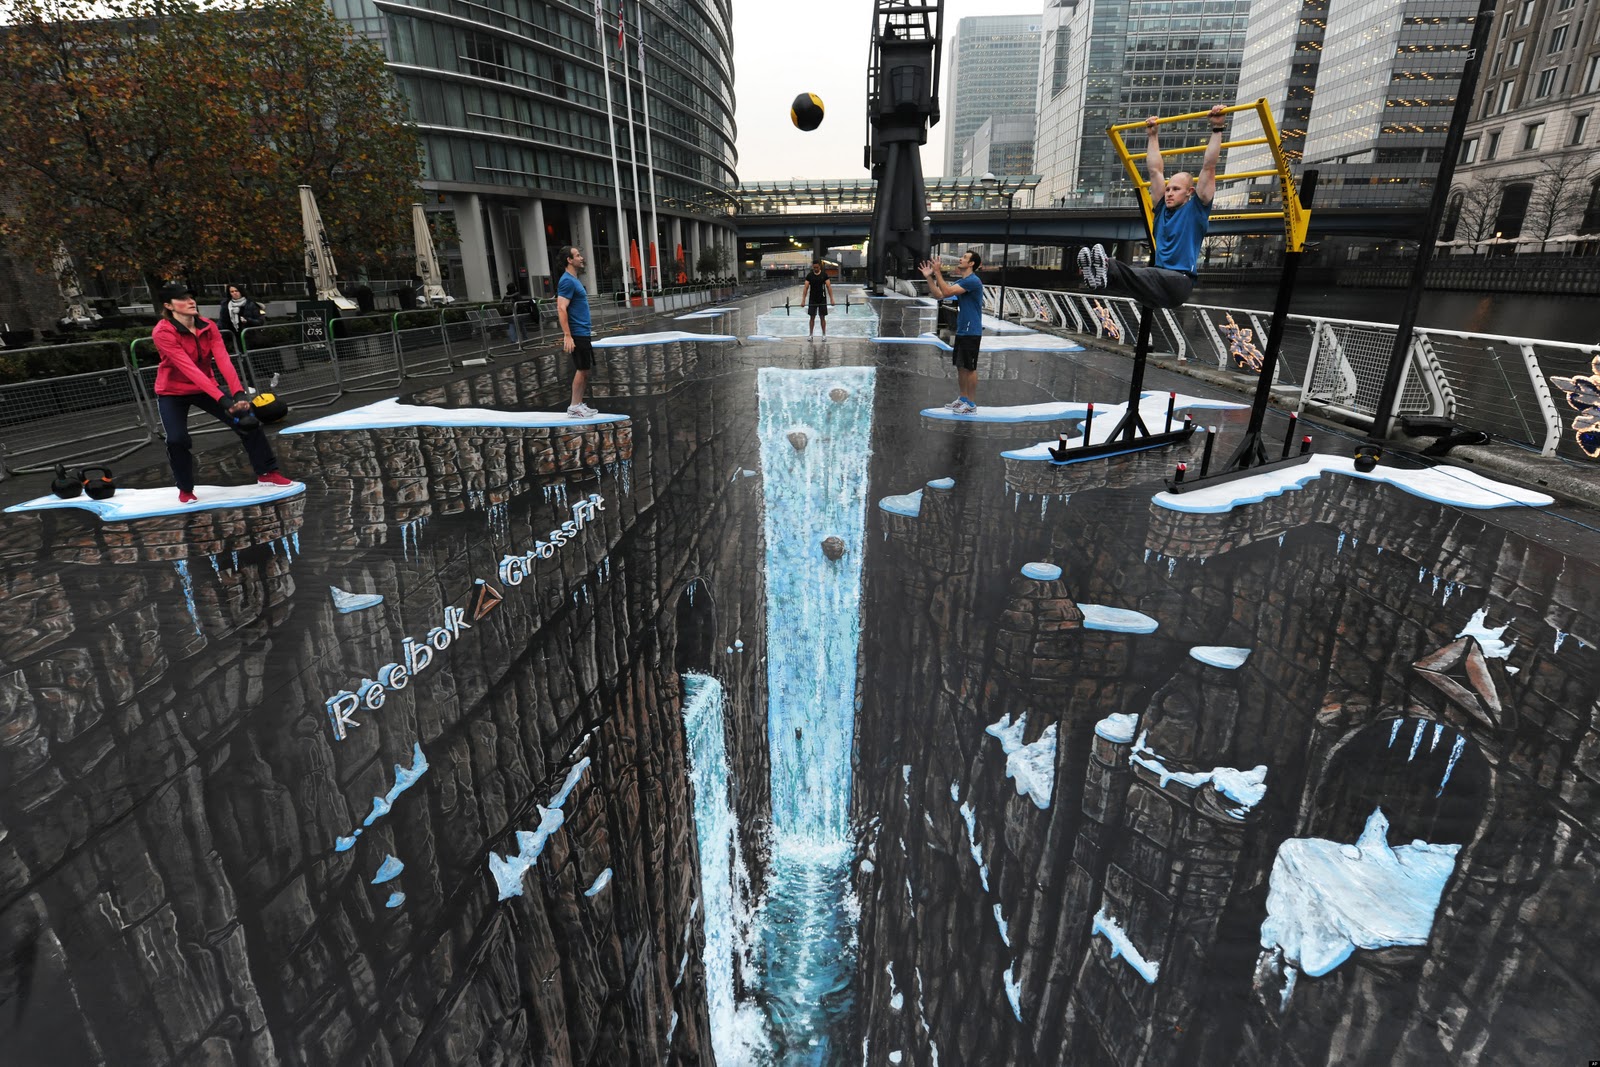 3D Street Mural world’s largest 3D painting